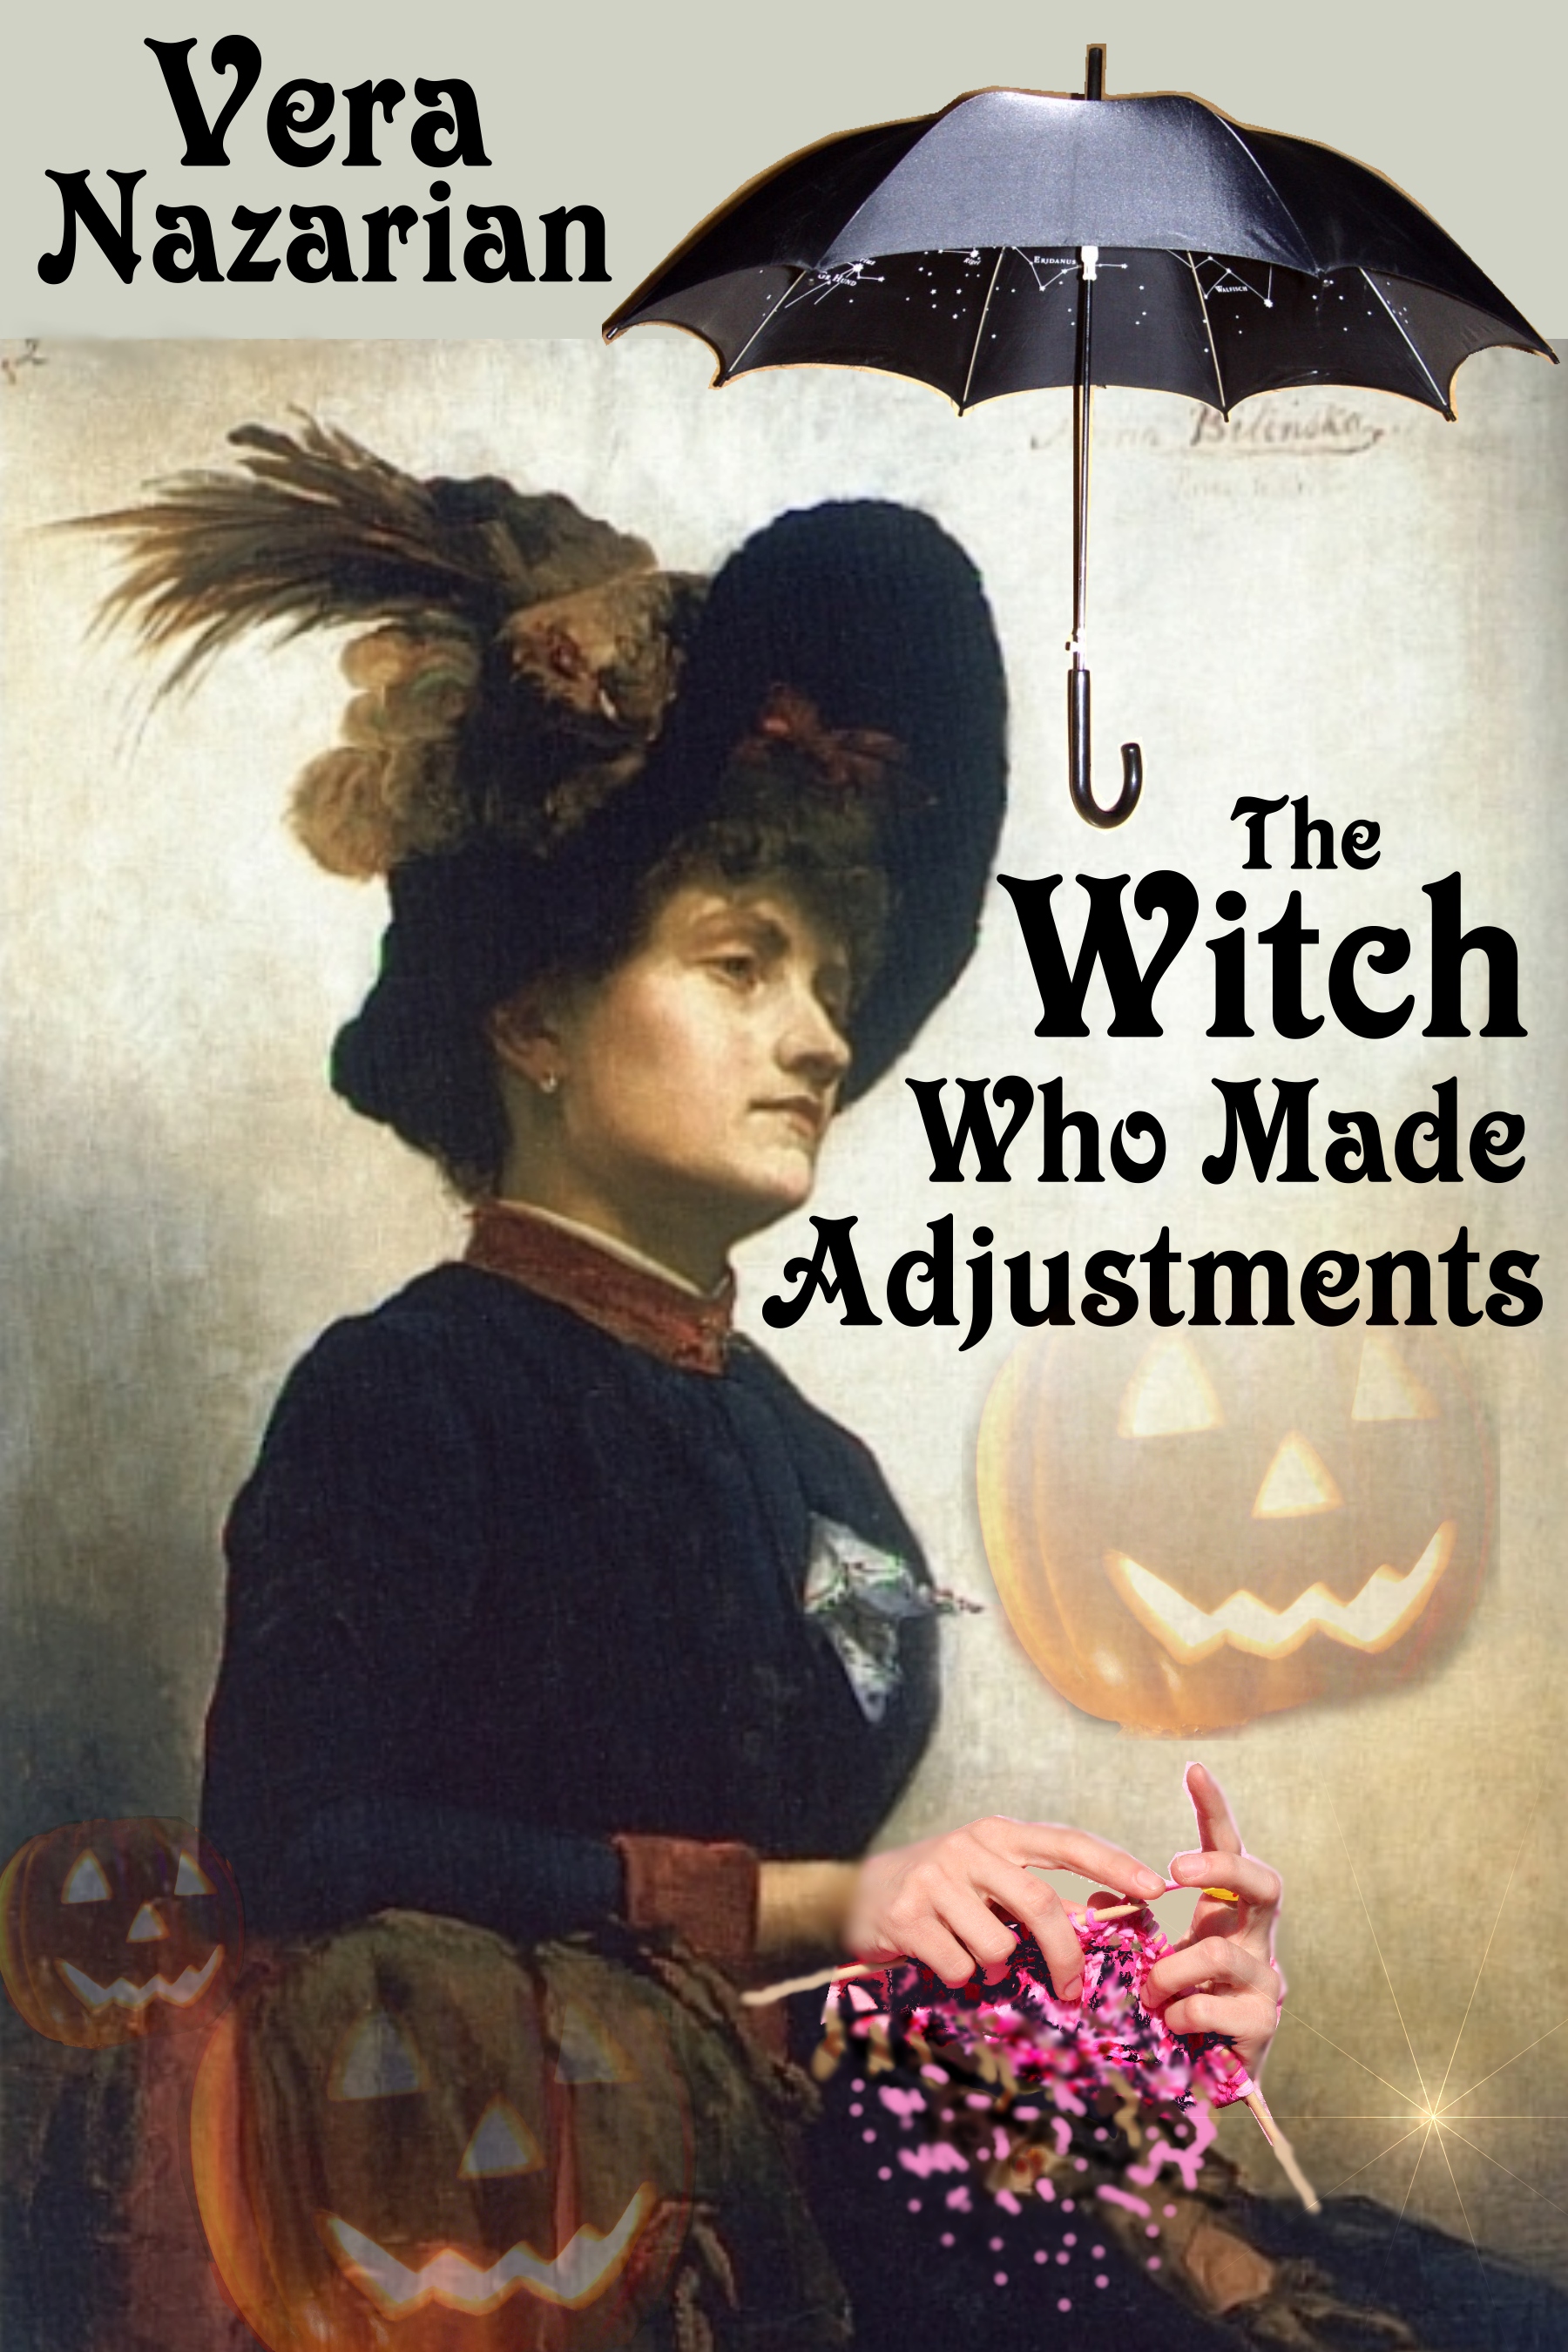 The Witch Who Made Adjustments by Vera Nazarian